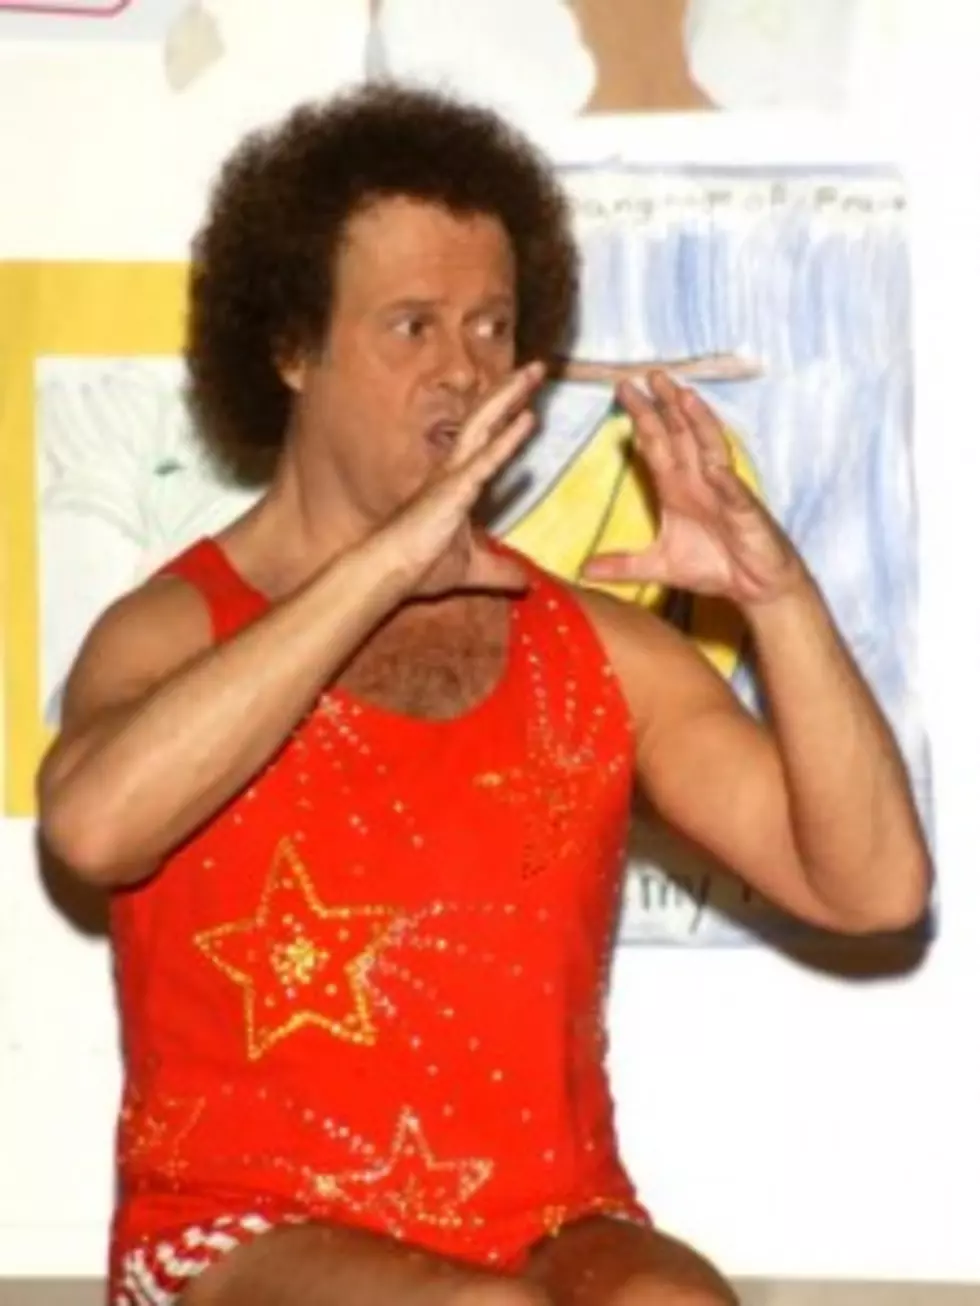 Richard Simmons Delivers Your In-Flight Safety Tips [Video]